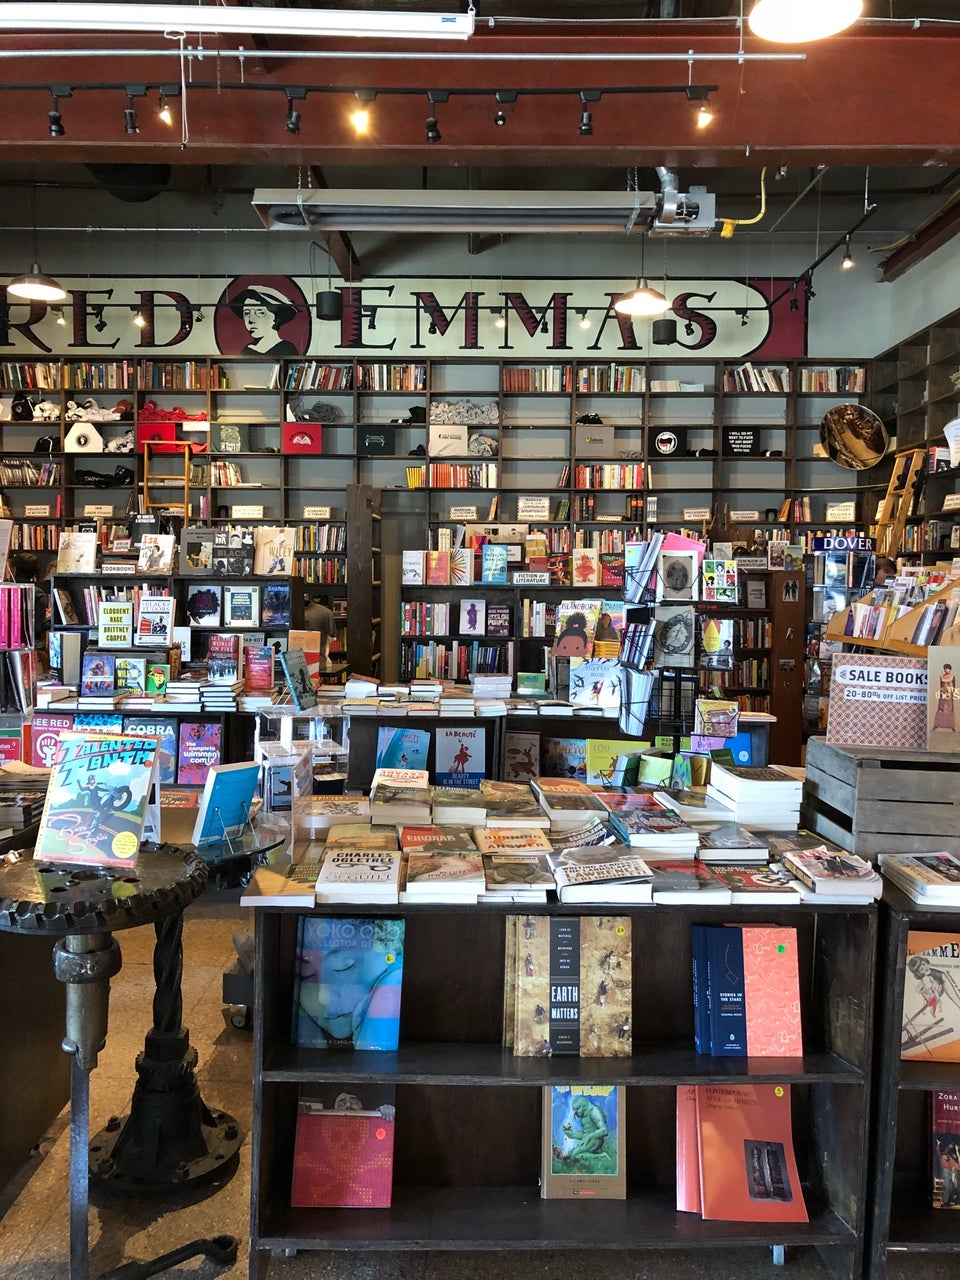 Photo of Red Emma's Bookstore & Coffee